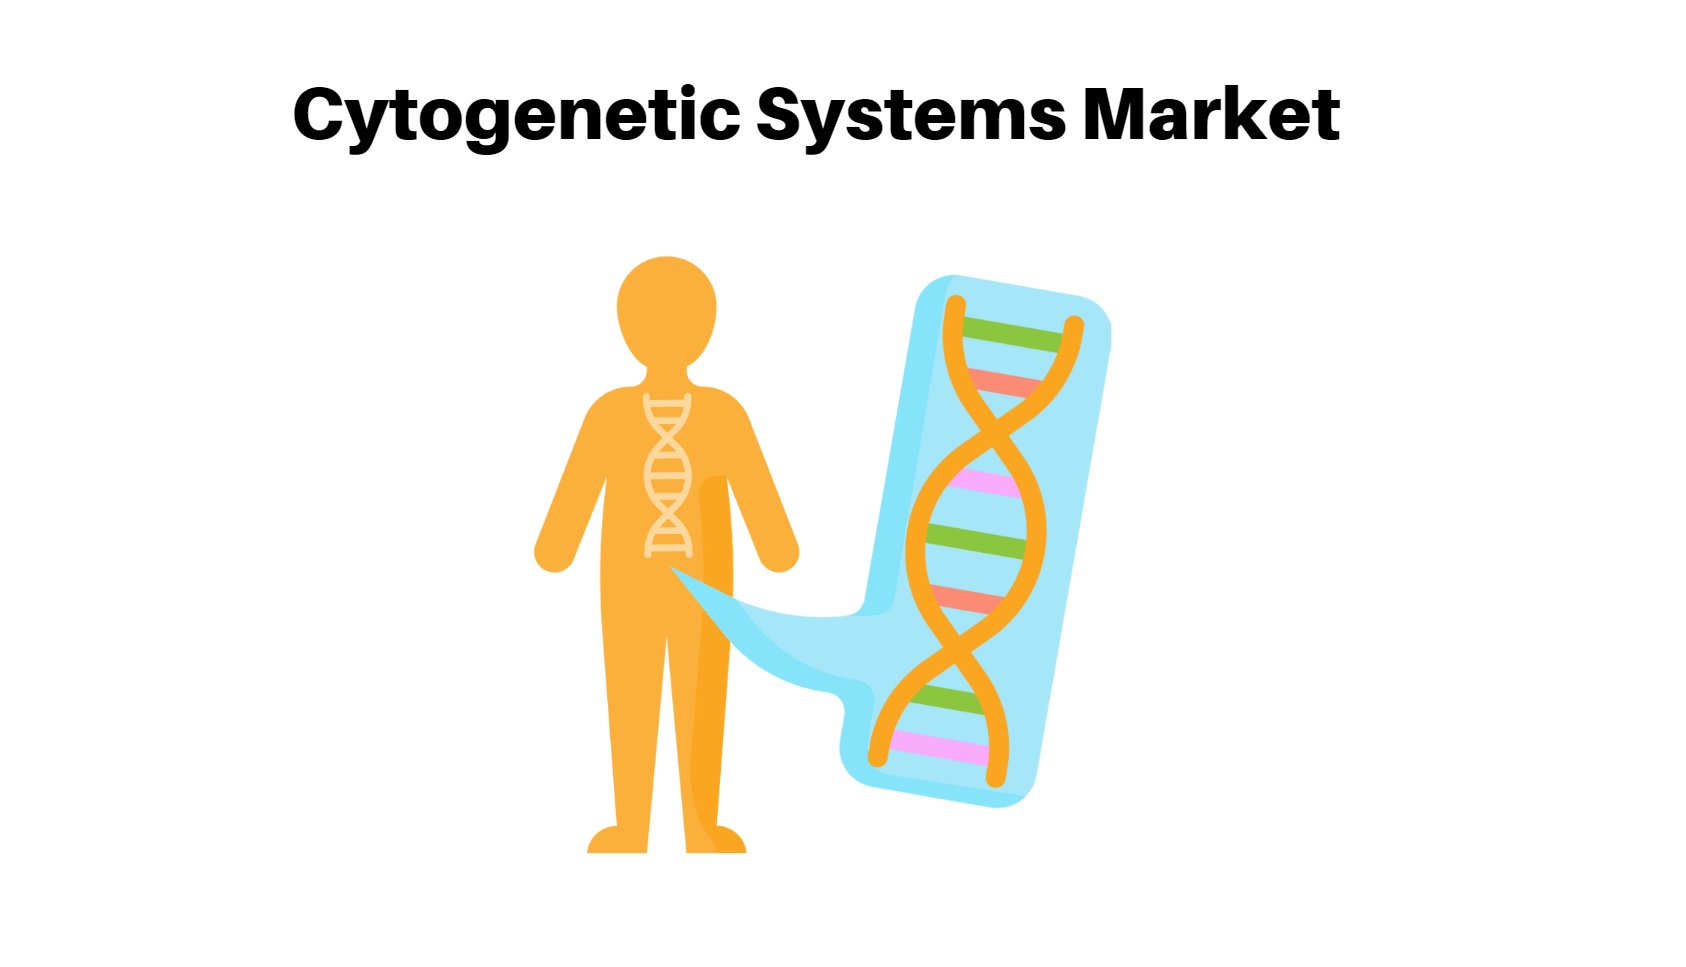 Cytogenetic Systems Market Is Expected To Rise At A CAGR Of 11.0% | Market.us